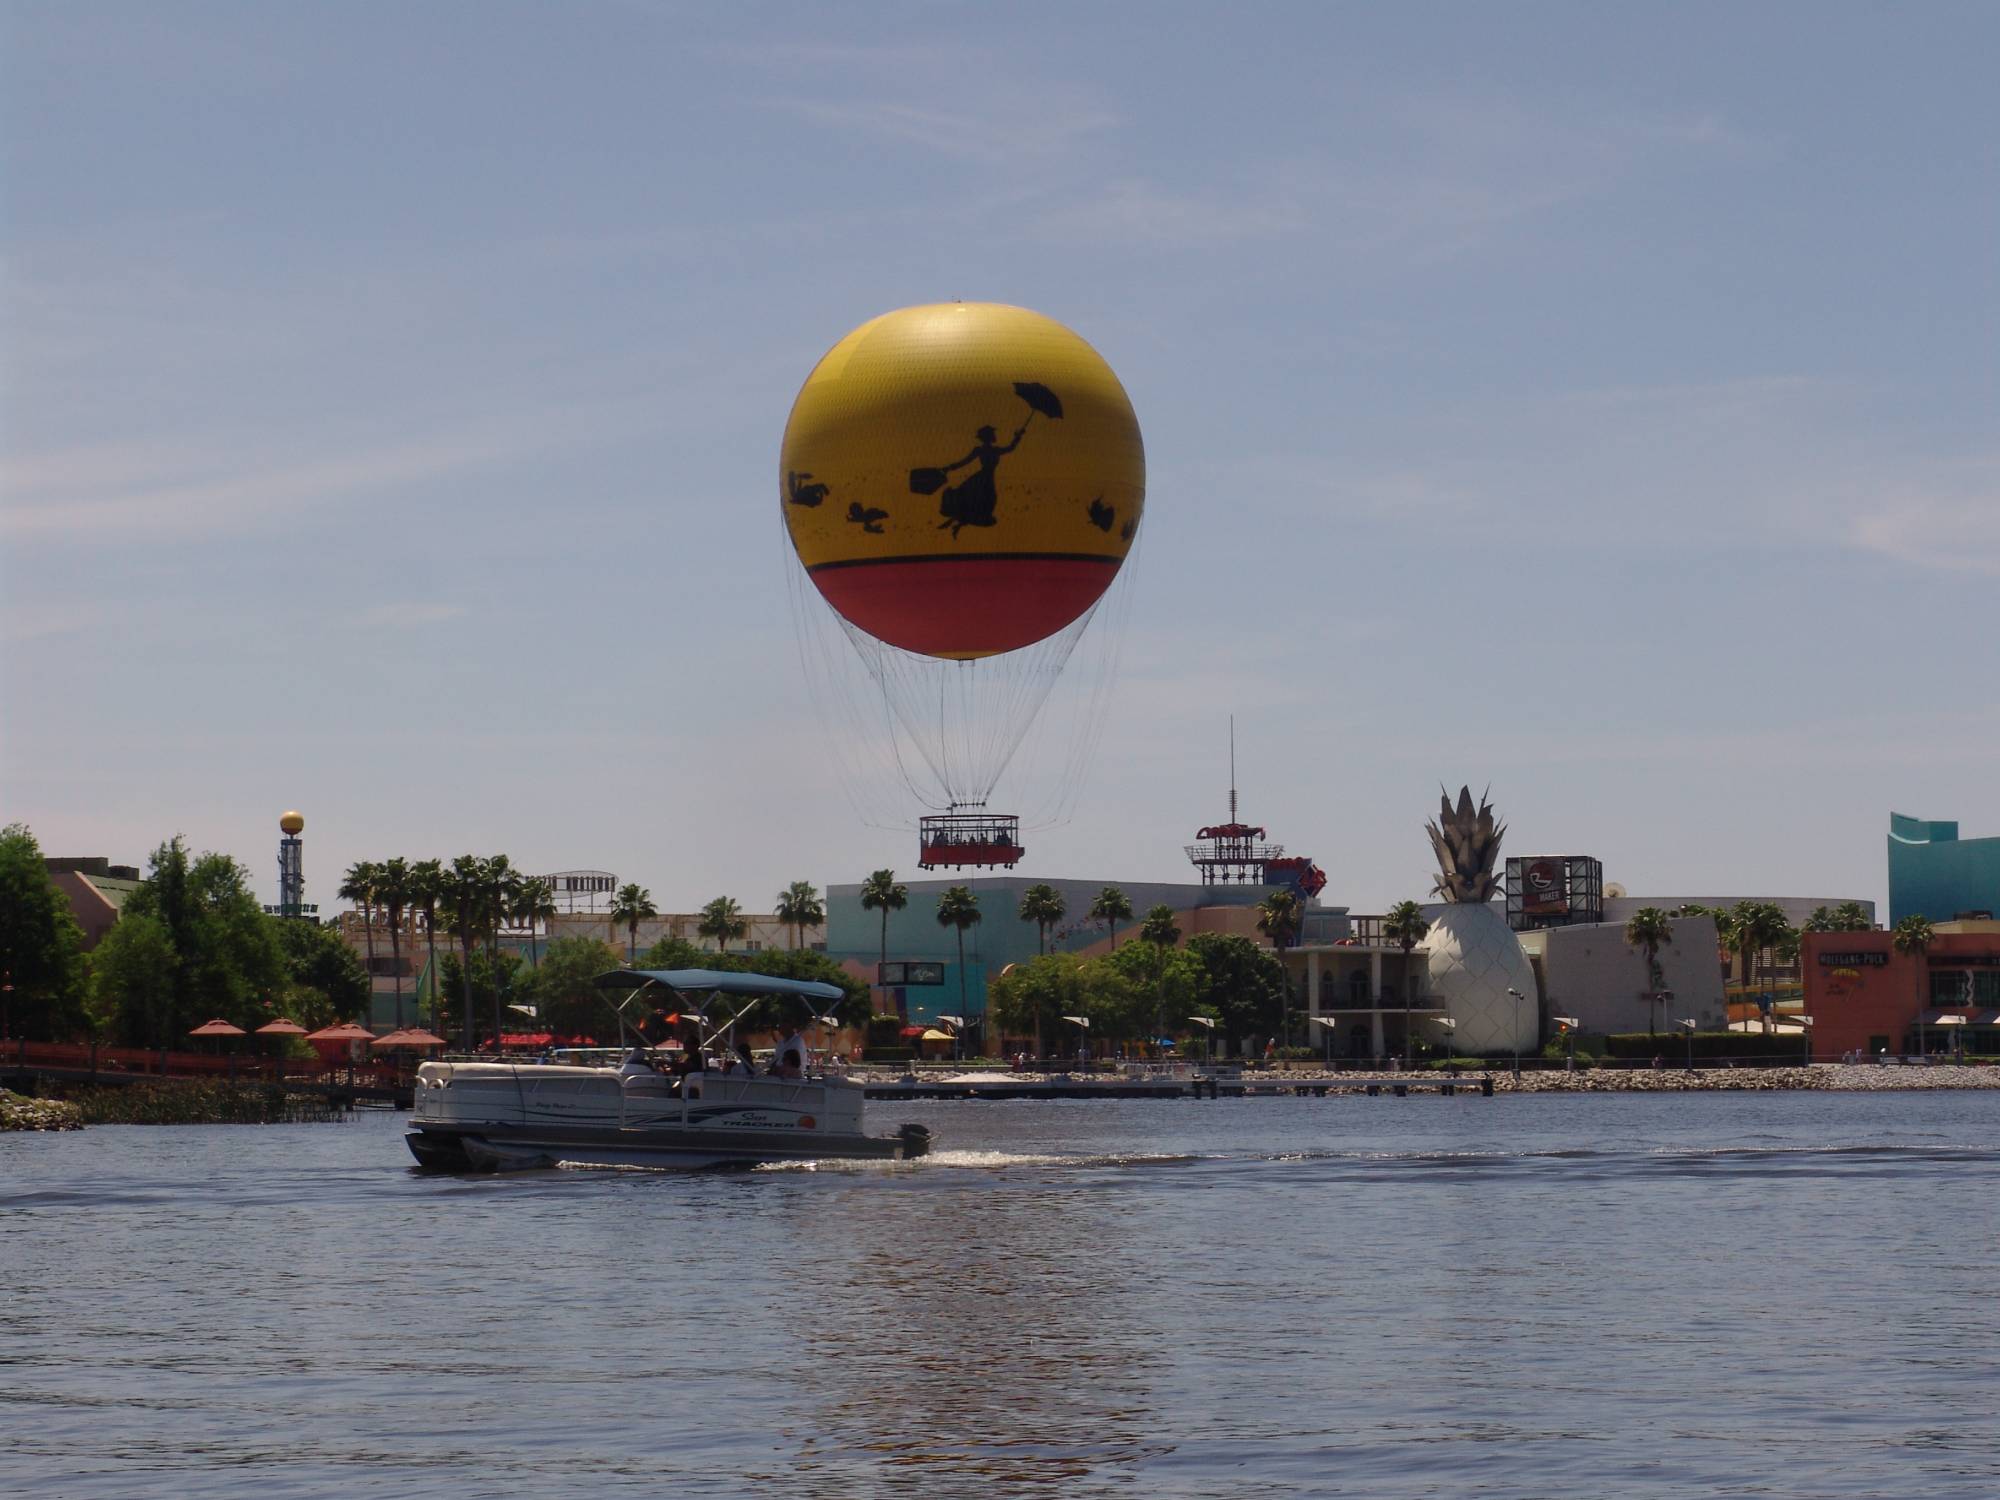 Downtown Disney - Characters in Flight over lake